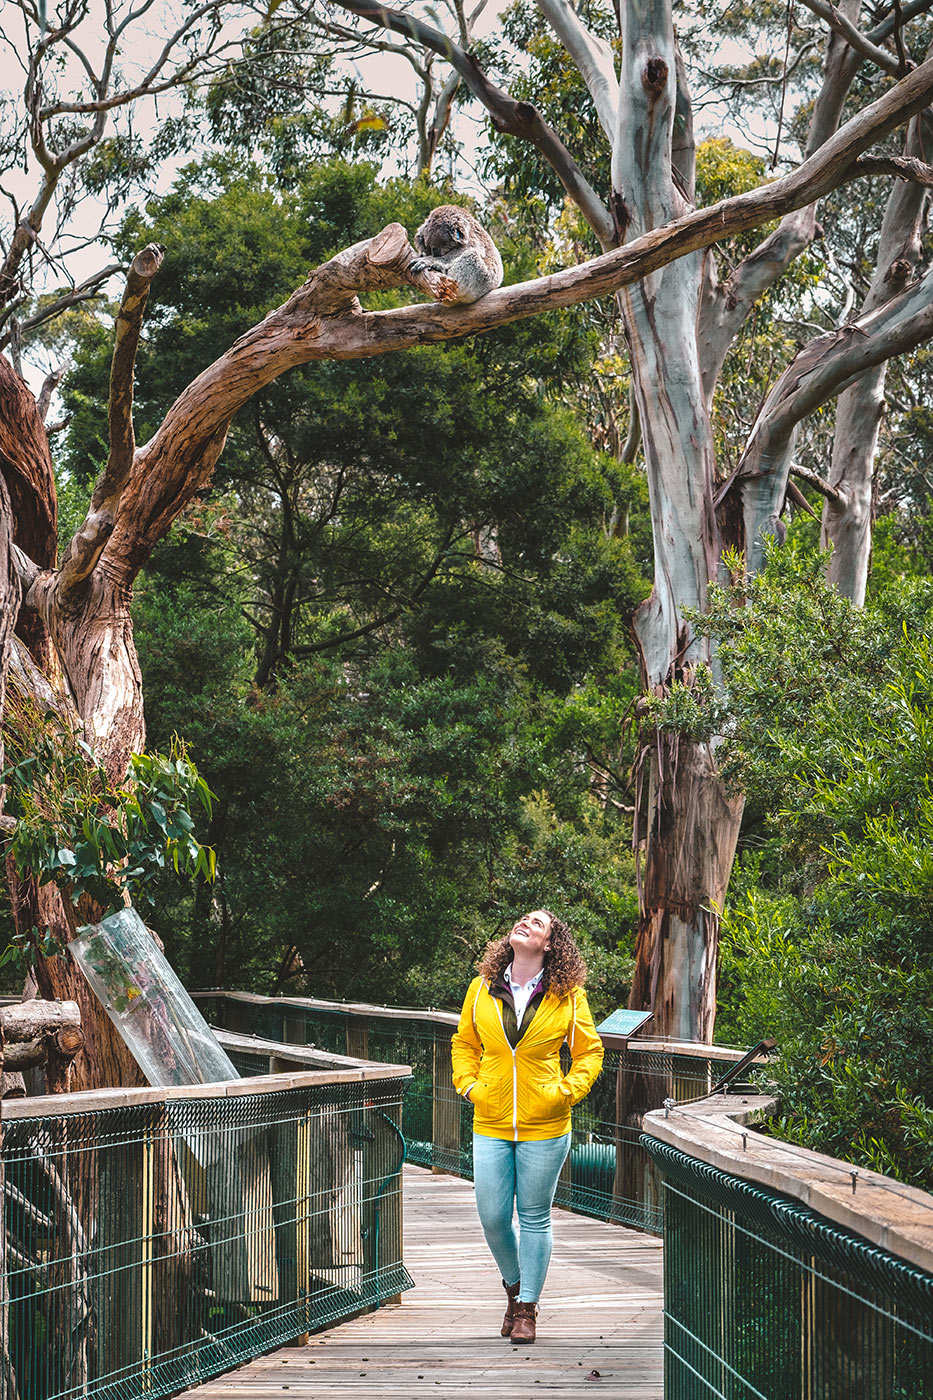 Best things to do in Phillip Island - Koala Reserve and boardwalk